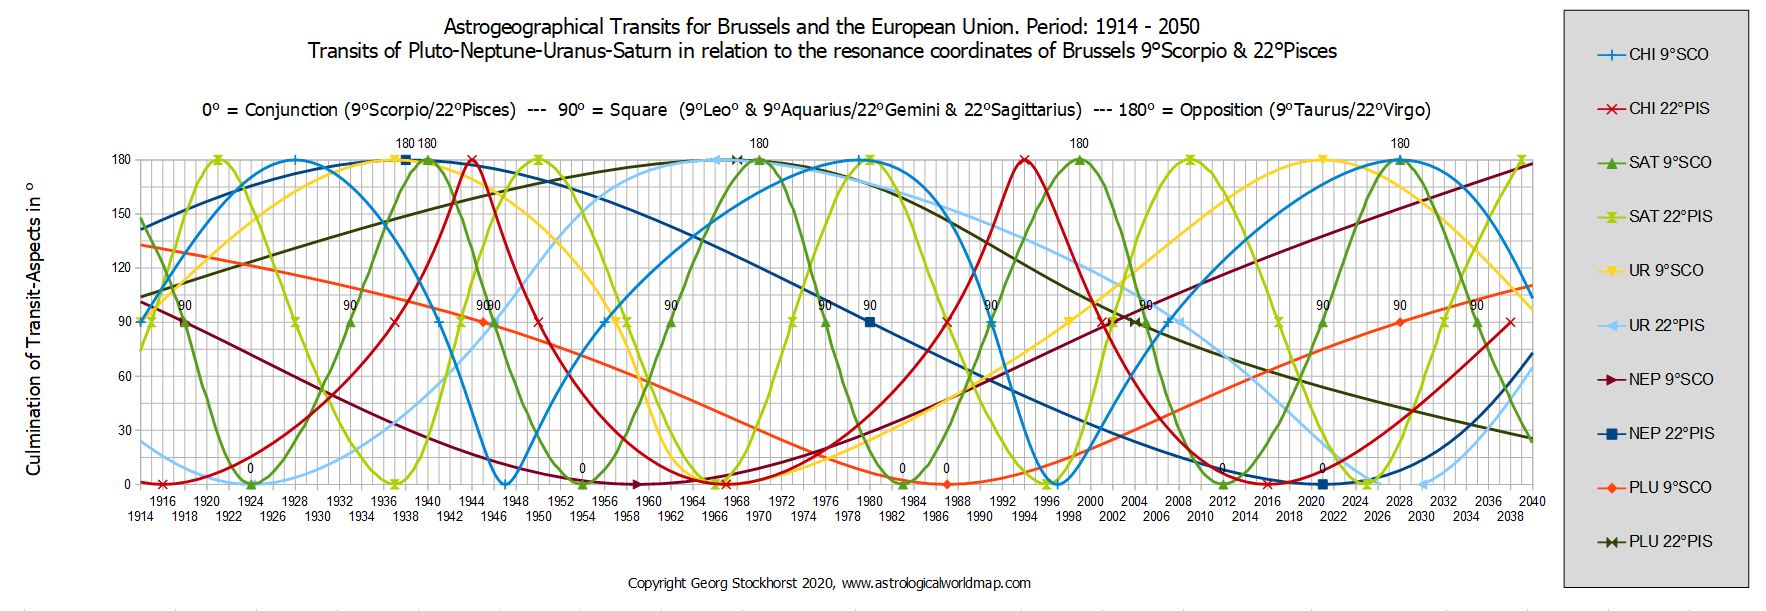 astrology and astrogeography of the European Union and brussels